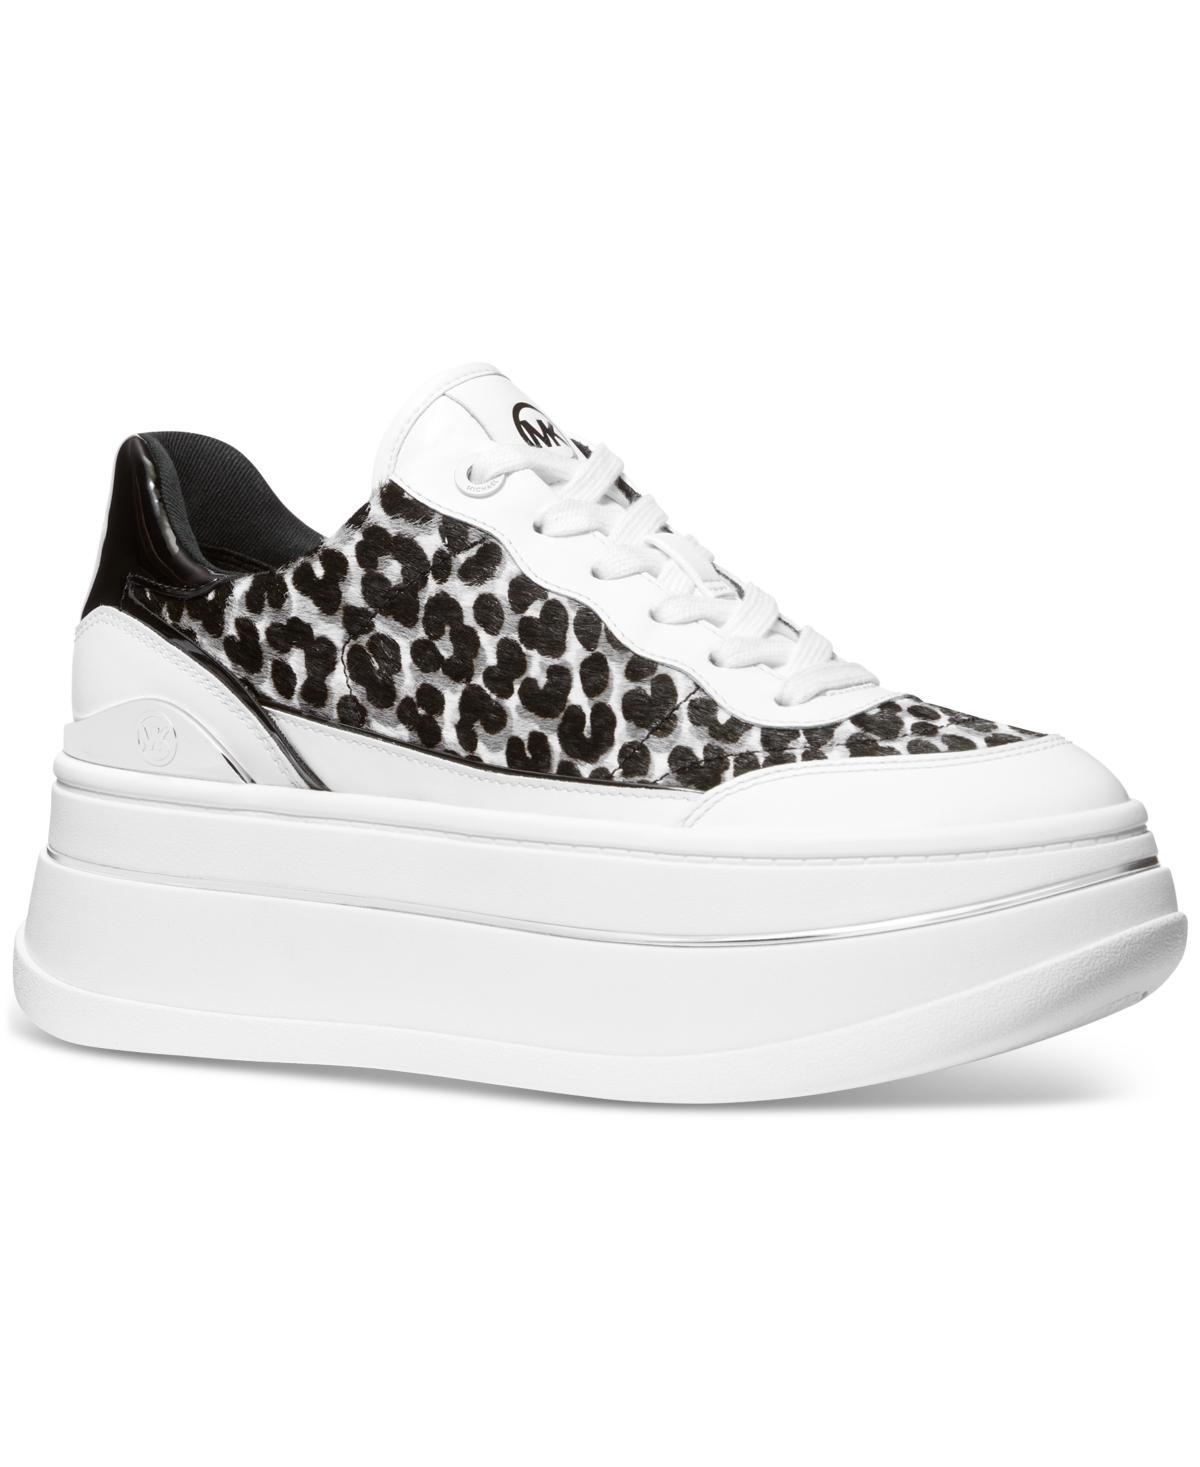 Michael Michael Kors Womens Hayes Lace-Up Platform Sneakers Product Image